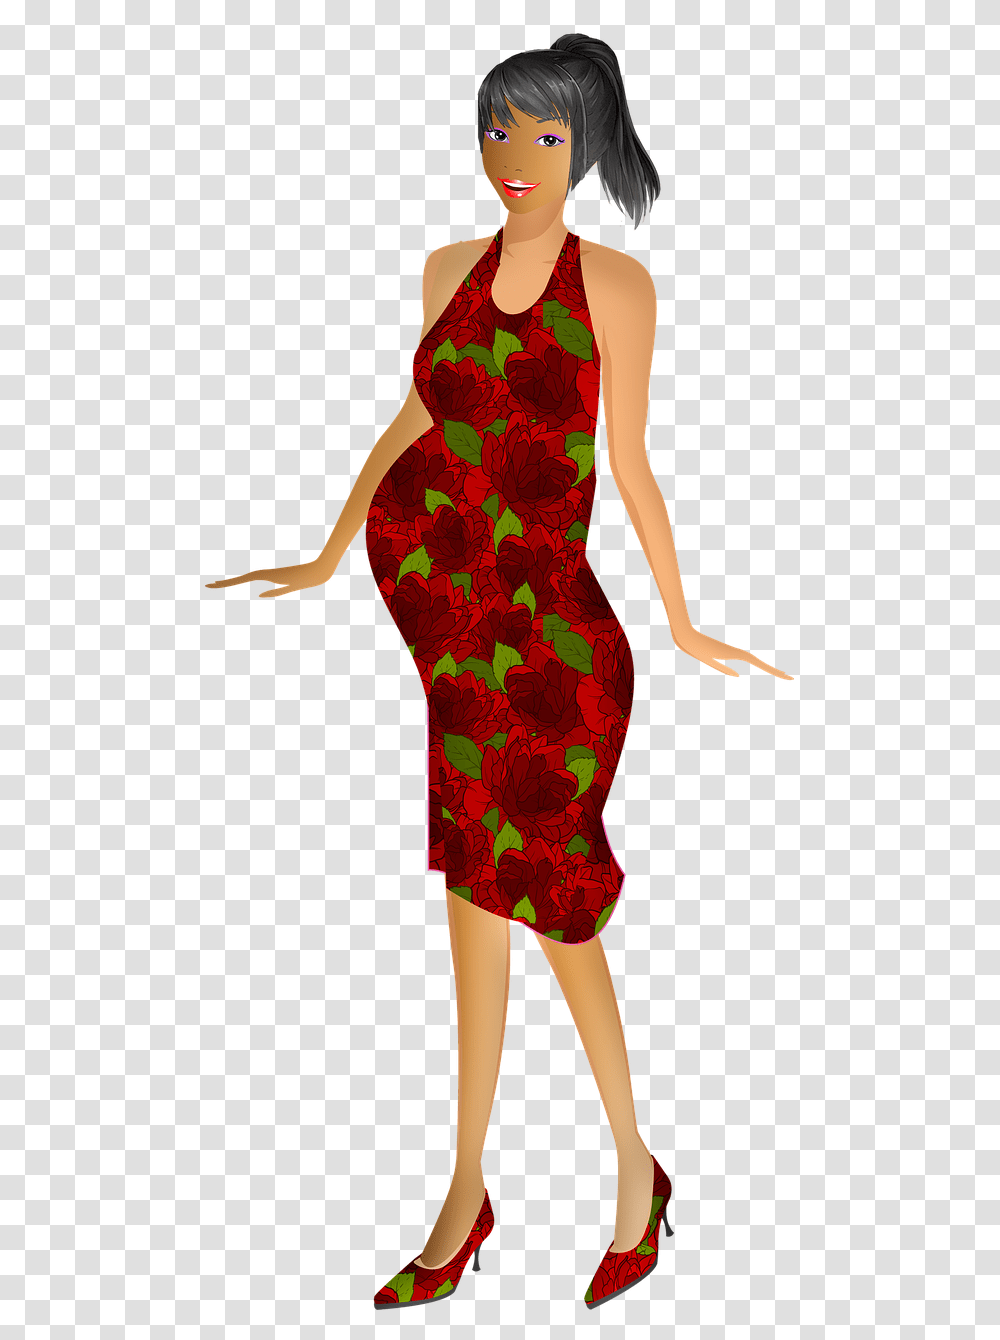 Pregnant Woman Young Pregnancy Free Photo Cocktail Dress, Leisure Activities, Dance Pose, Female Transparent Png